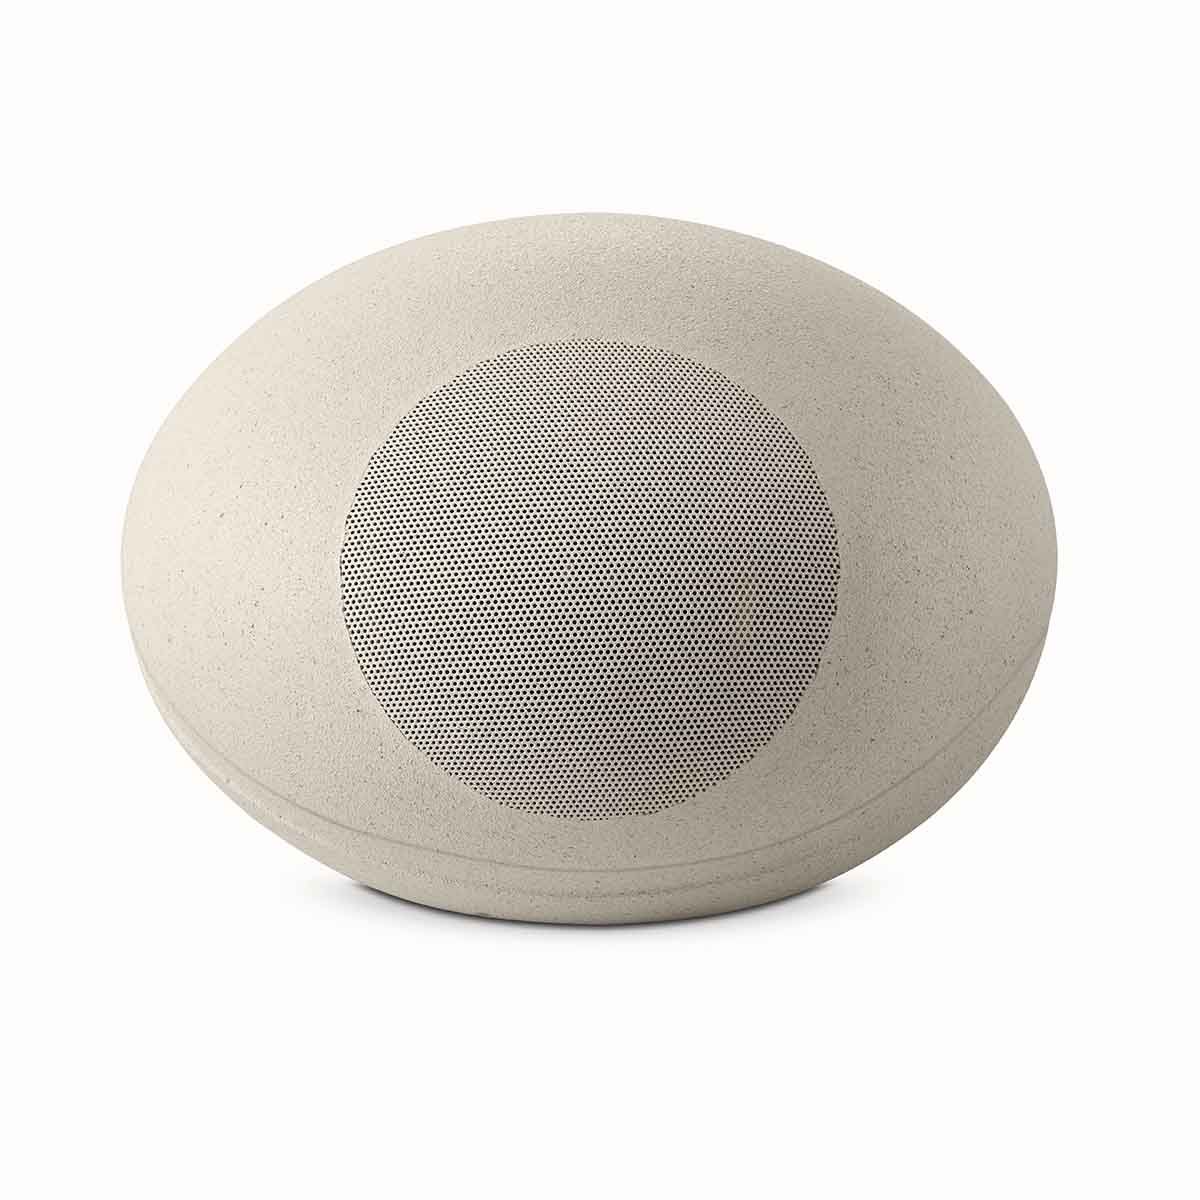 Focal OD Stone 8 2-Way Outdoor Speaker - Each - limestone front view